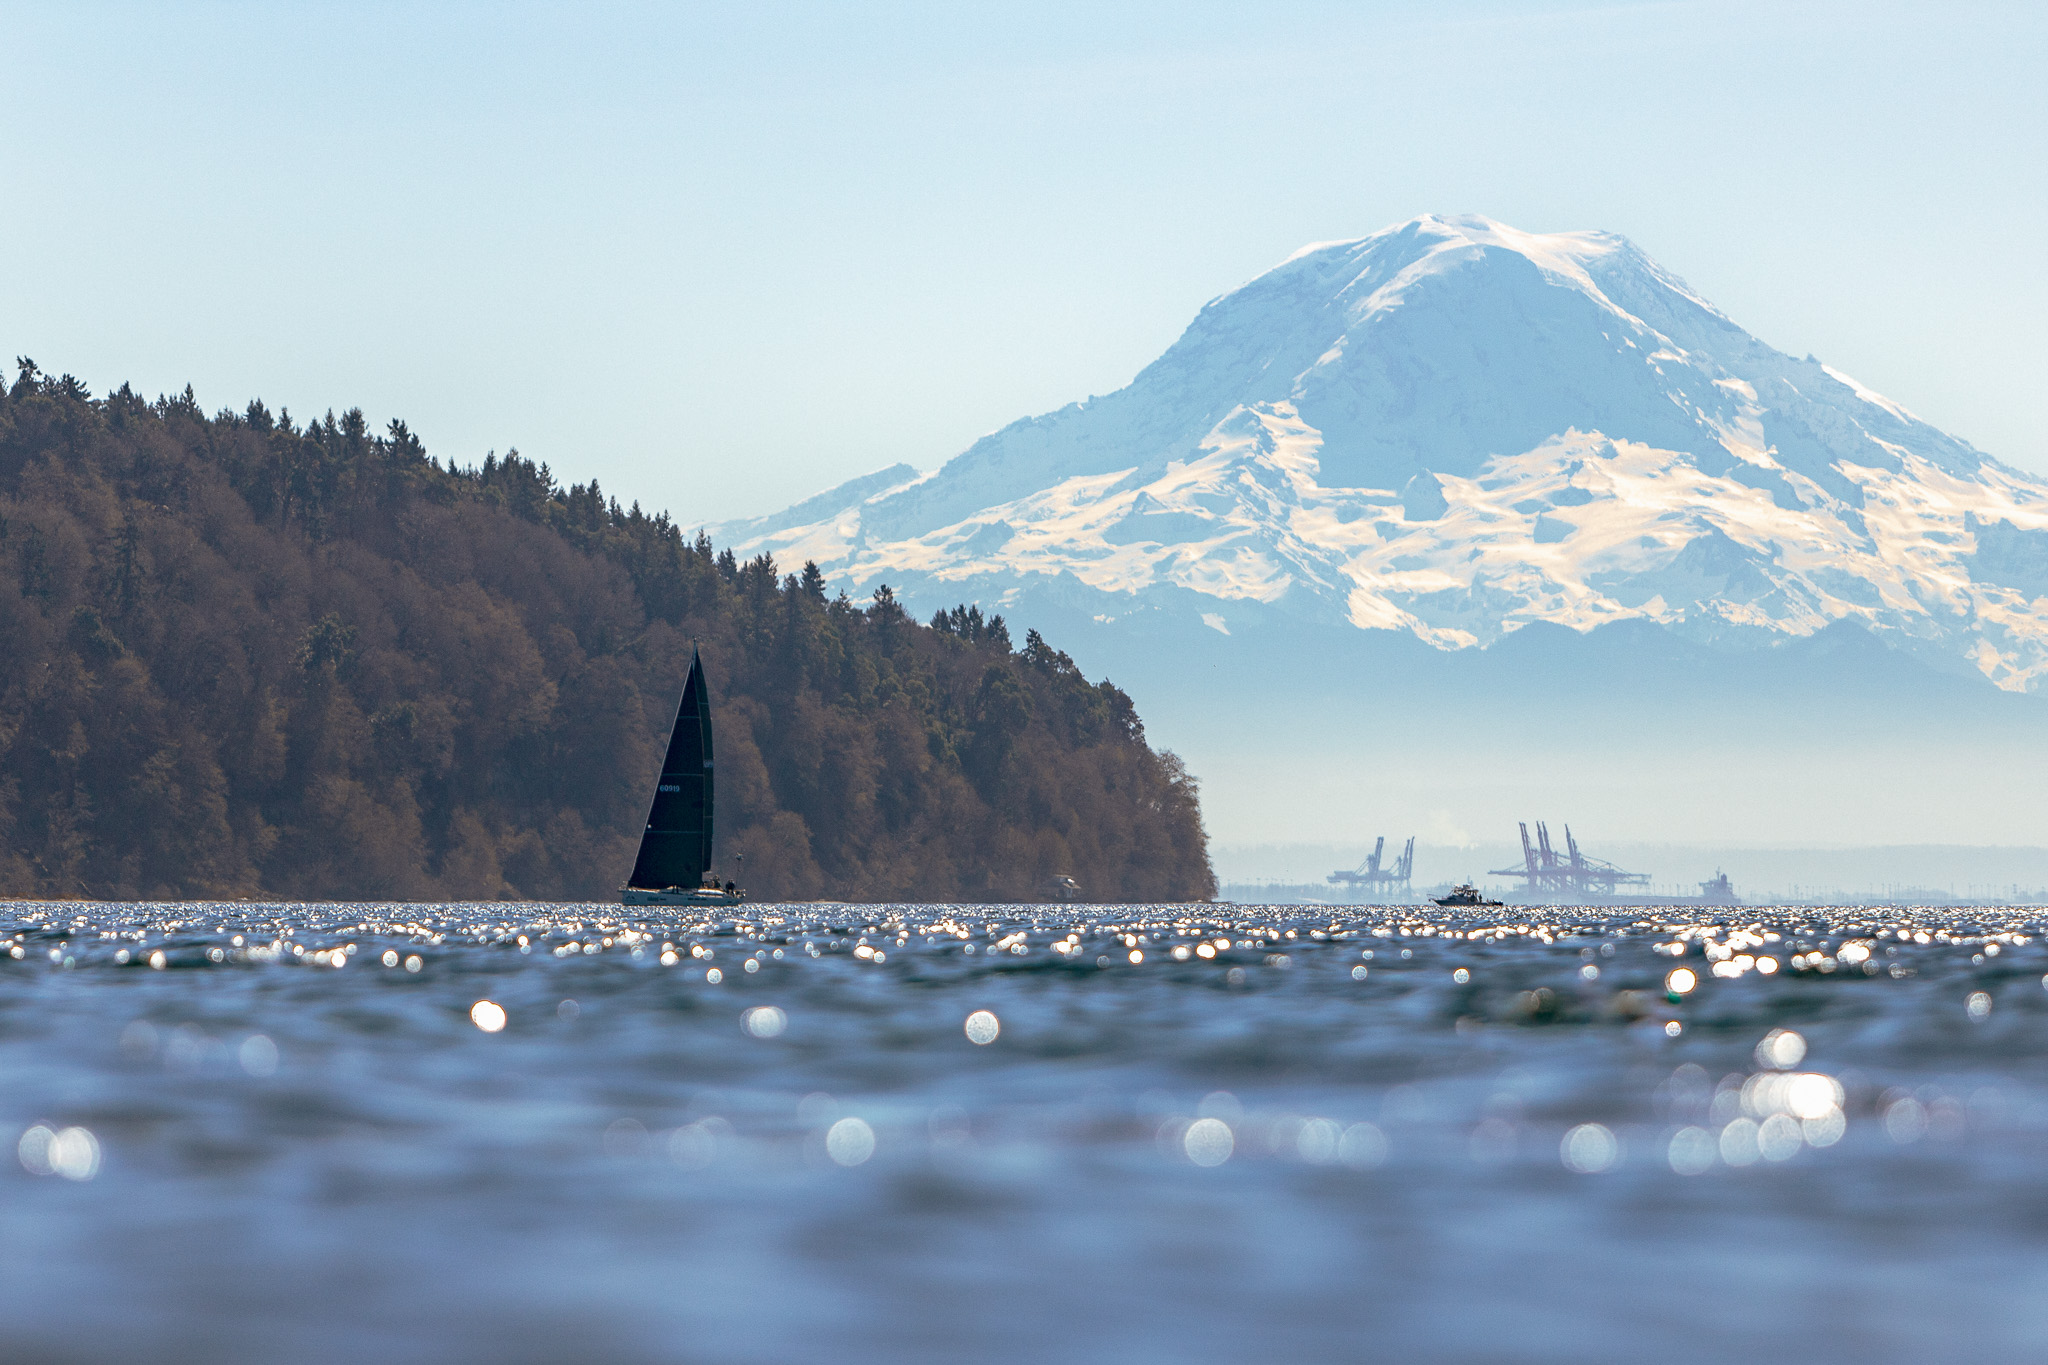 A view of a sailboat in the puget in sound with Mount Rainier in the background